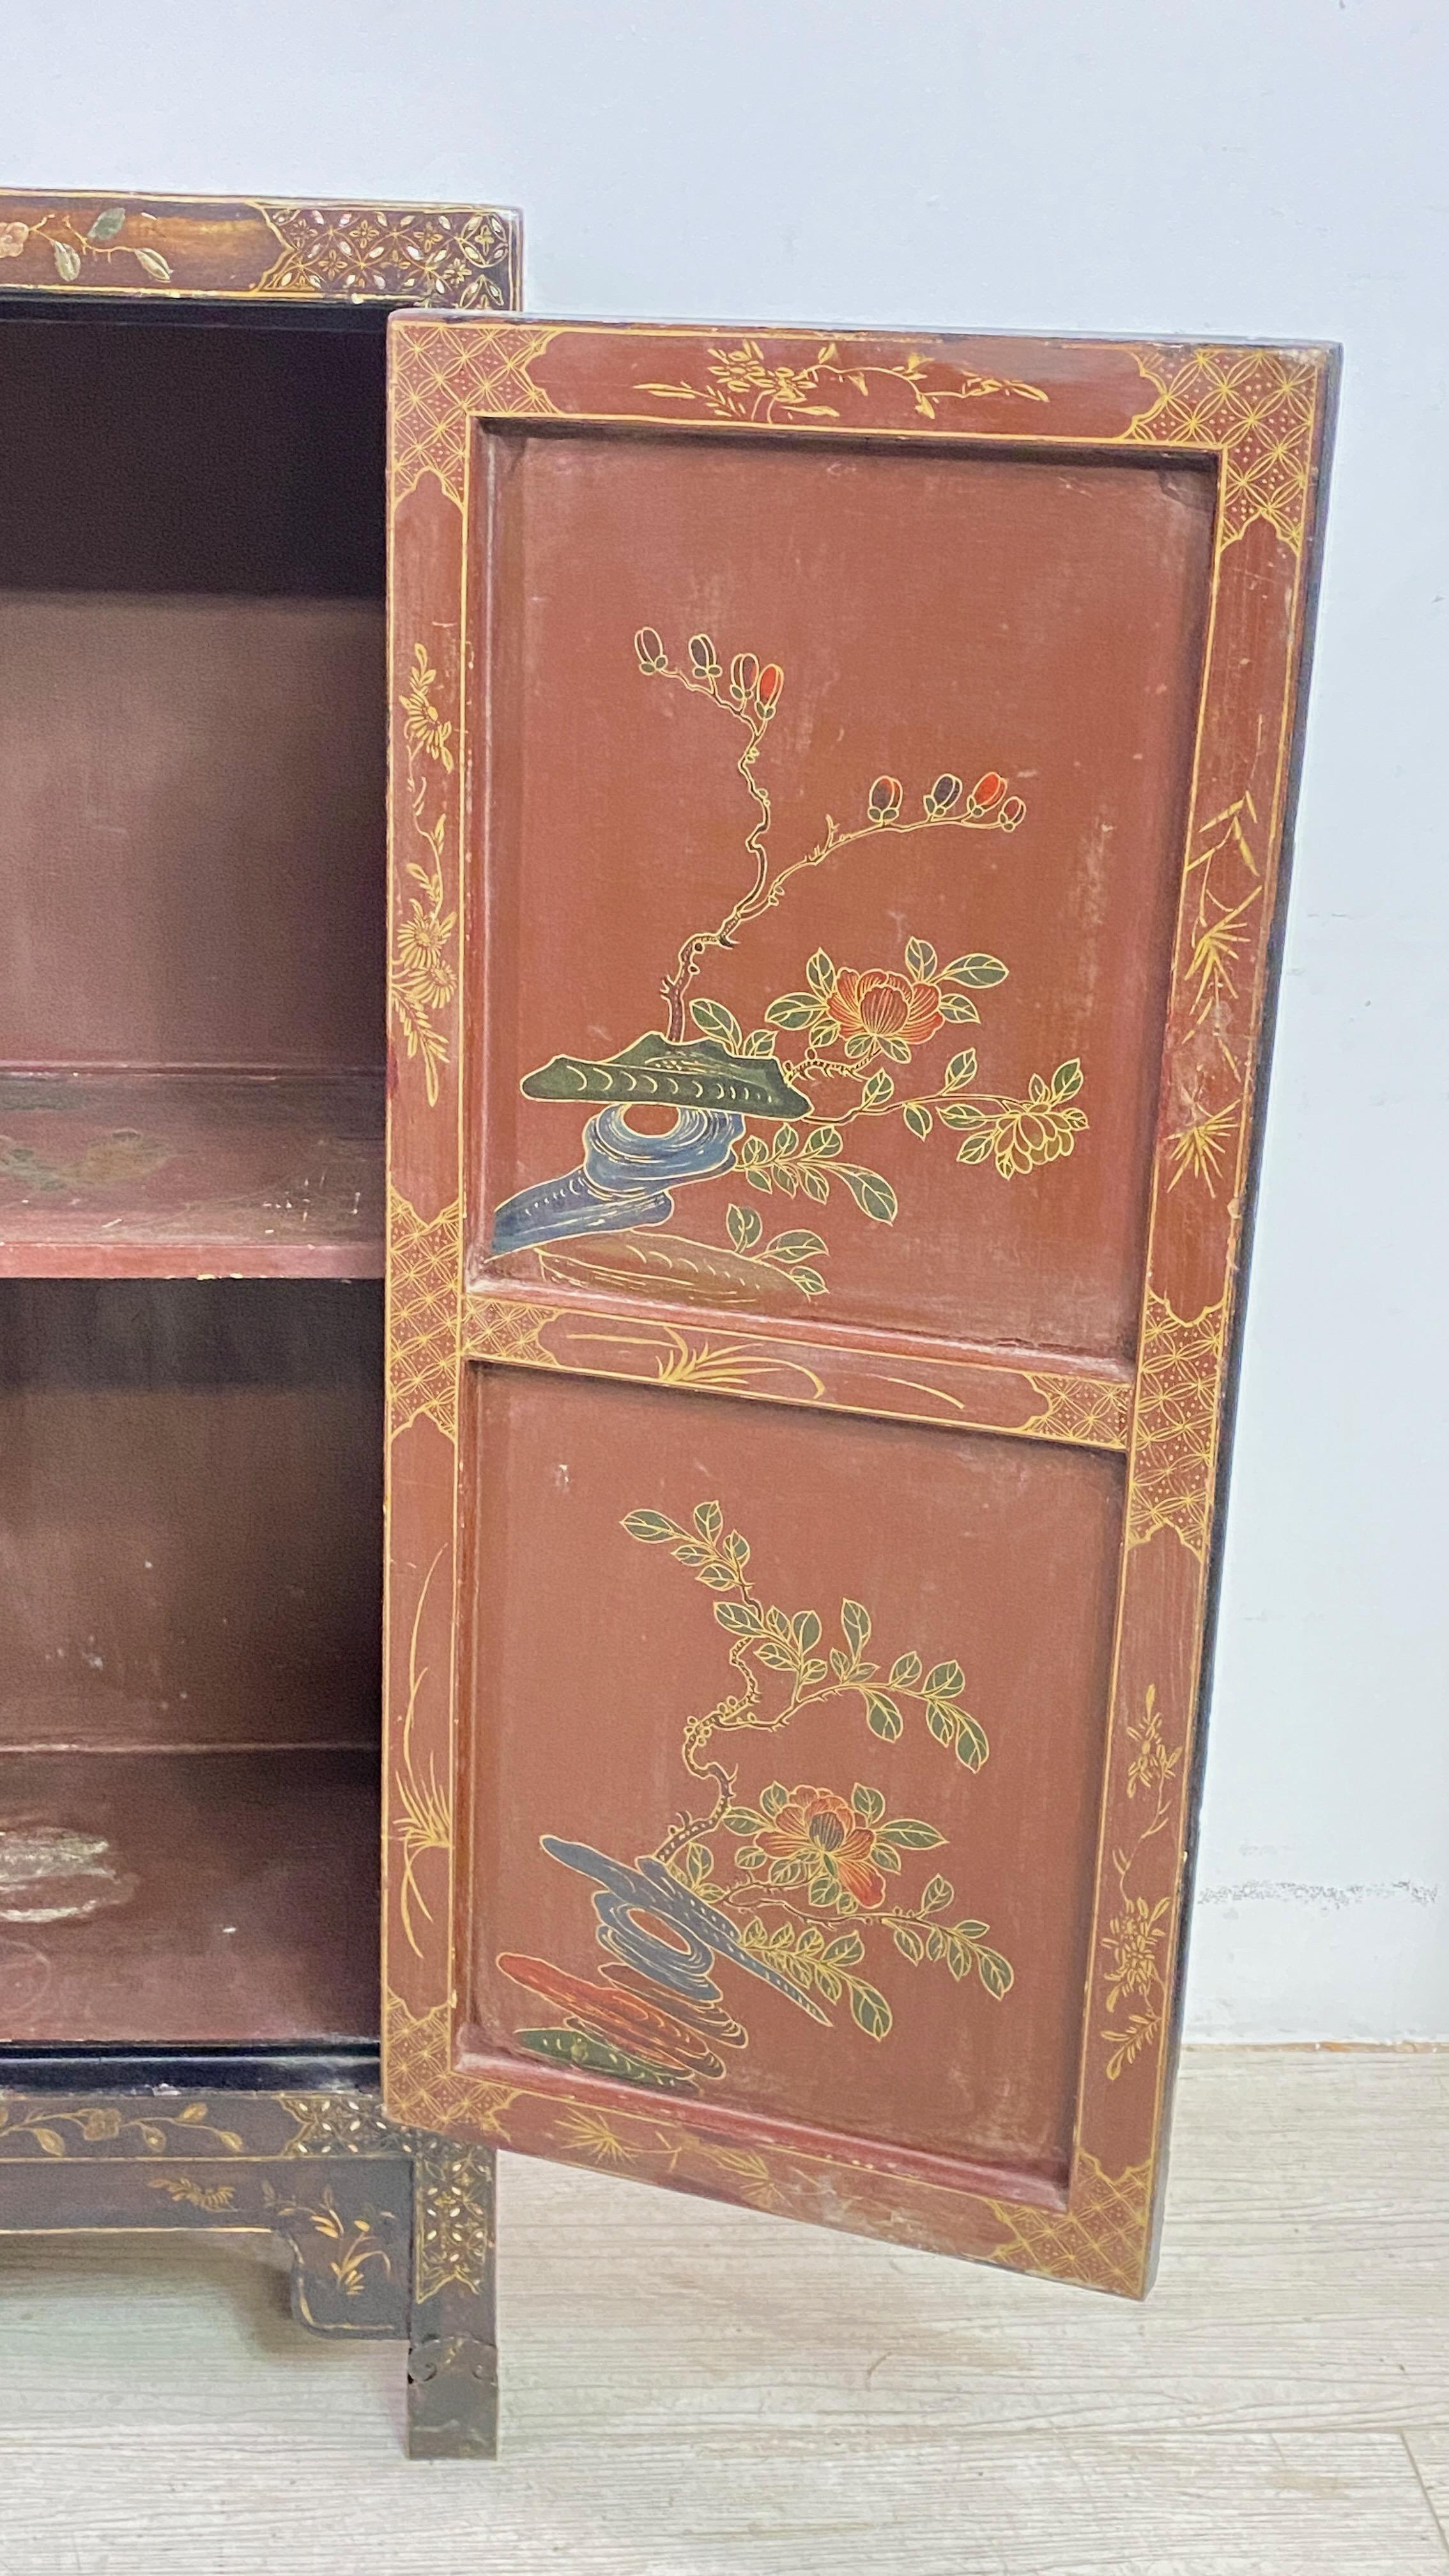  Pair of Chinese Laquer and Hardstone Cabinets, Late 19th - Early 20th Century For Sale 6